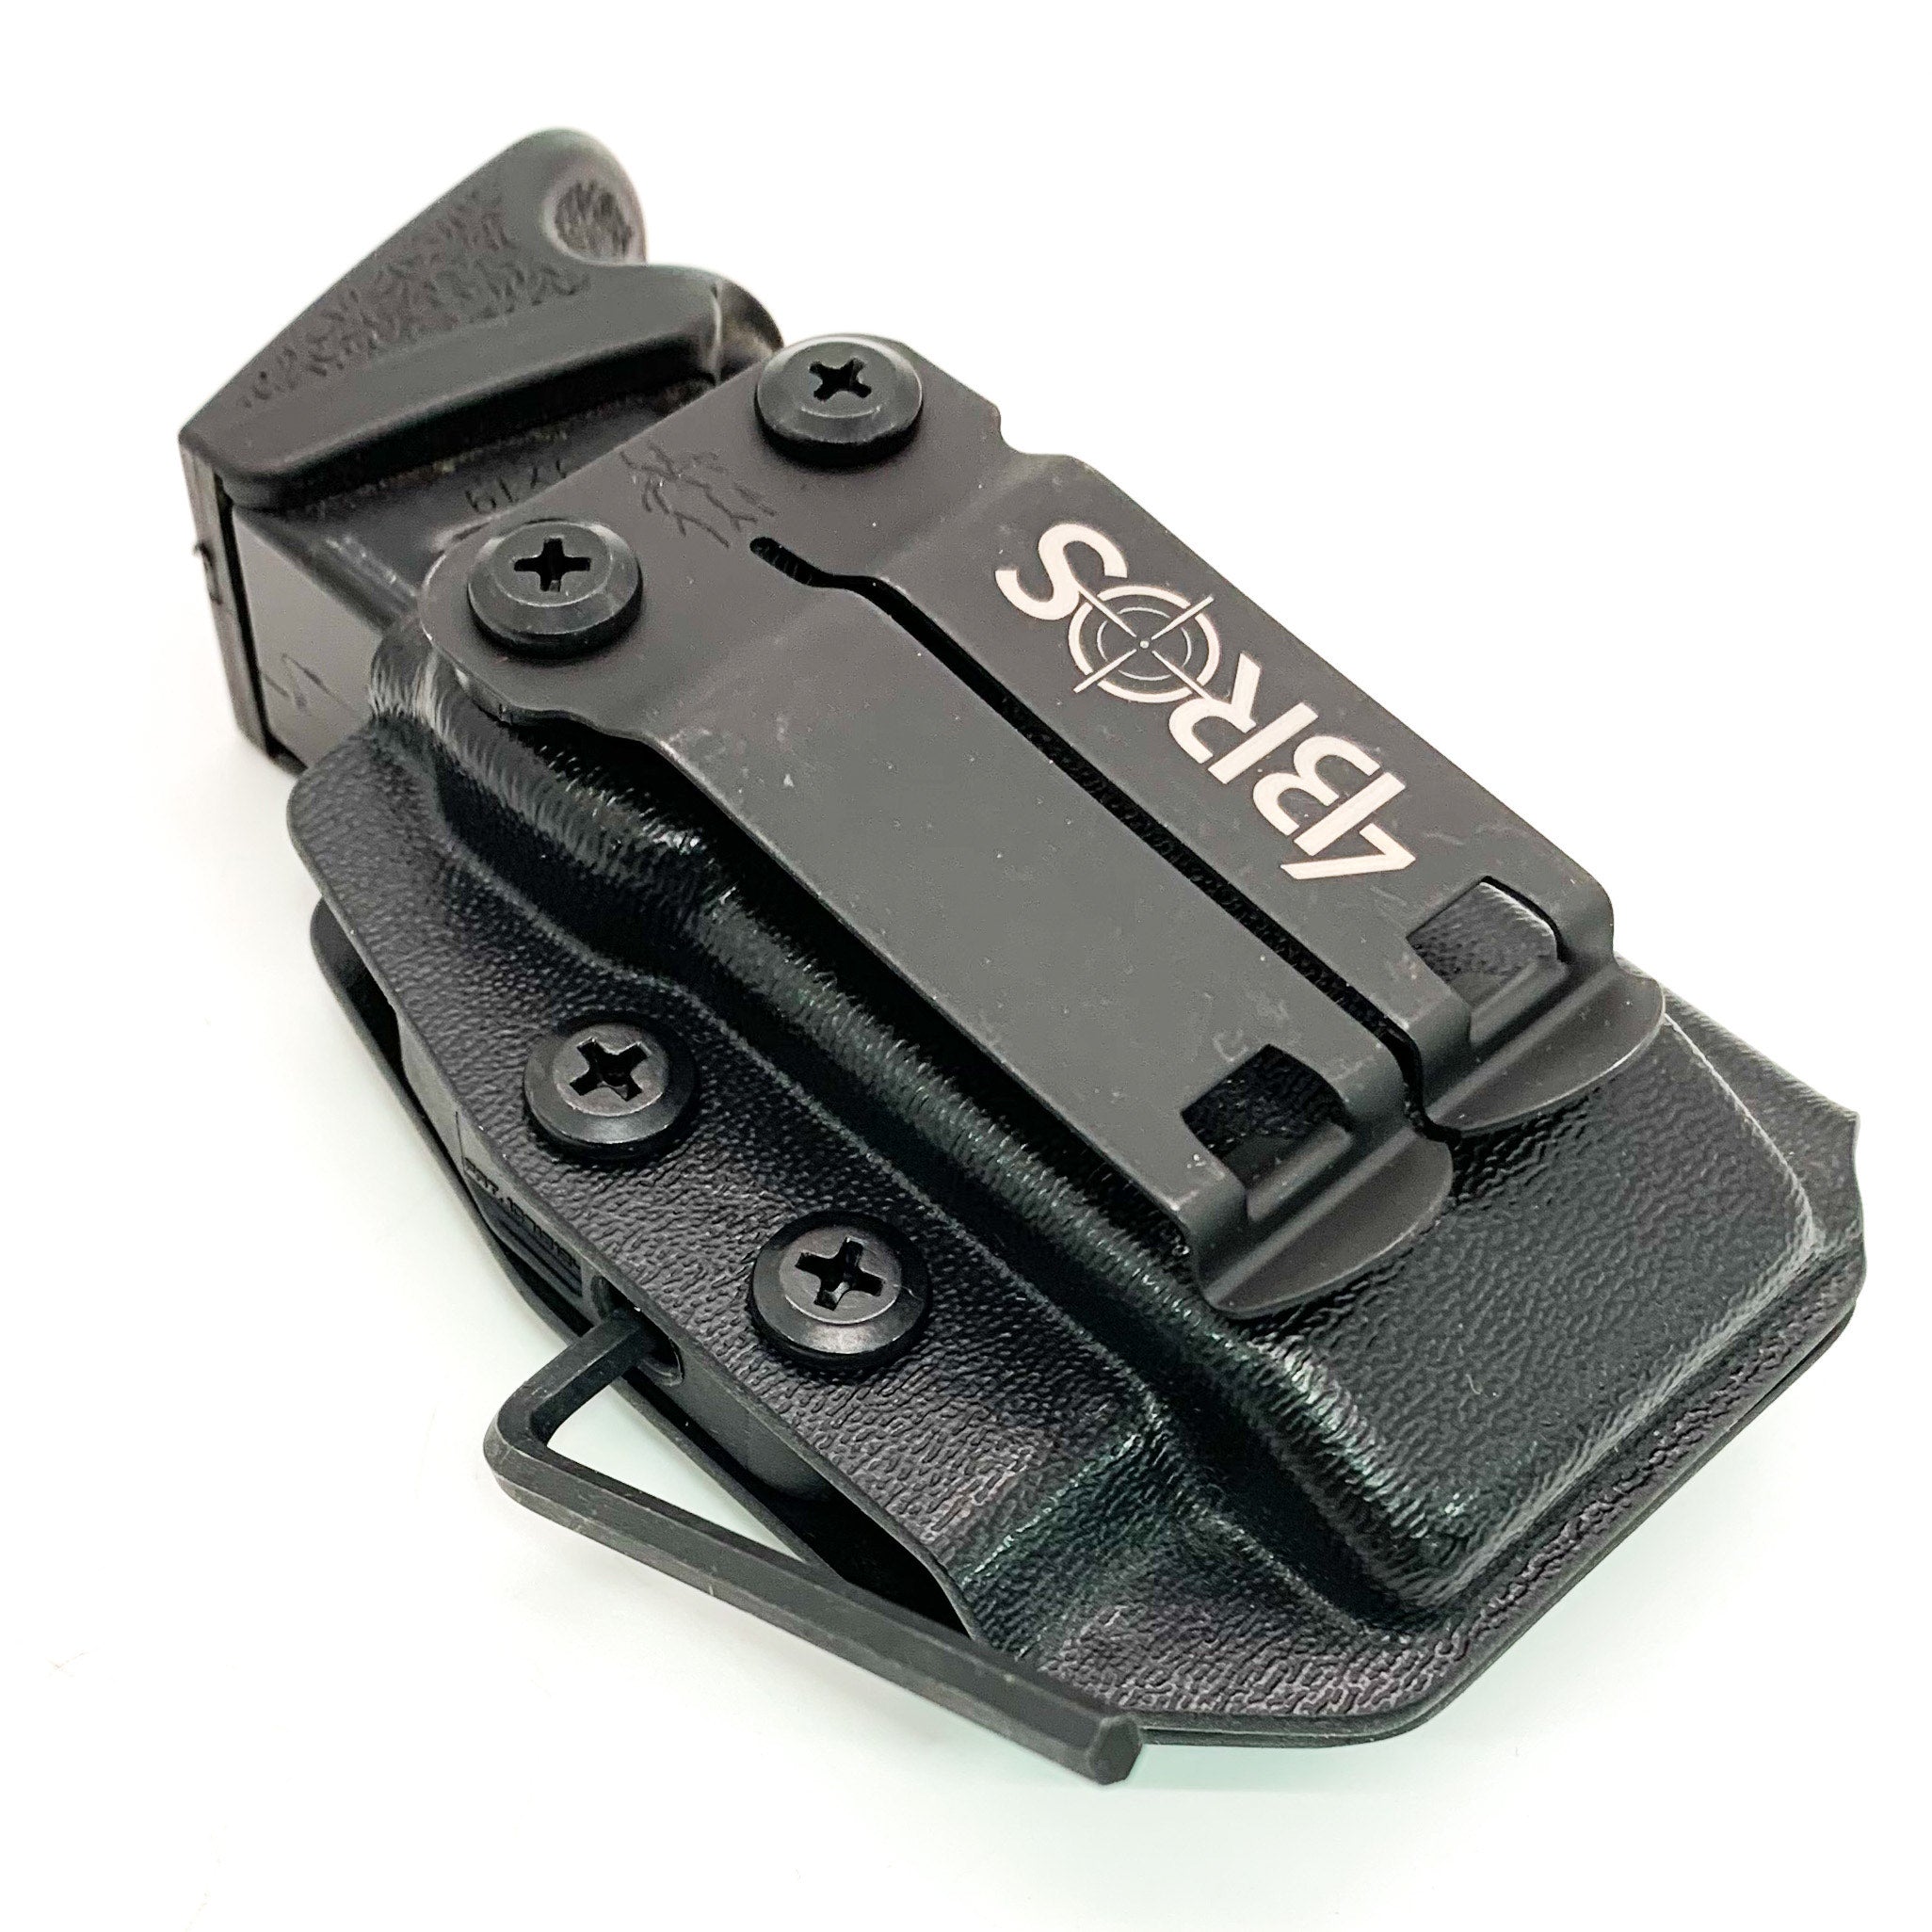 For the best, Inside Waistband IWB AIWB H&K VP9 and VP40 magazine carrier, holster, & pouch for the Sig P320, P365, P365XL, Glock 17, 17L, 19, 22, 23, 26, 27, 34, 35, 45, 31, 32, 33, .357 Sig, 9mm & 40 Walther, Smith & Wesson, Arex, and 509, 509T, LS EDGE FN magazines, shop Four Brothers Holsters. 4BROS, Made in USA.